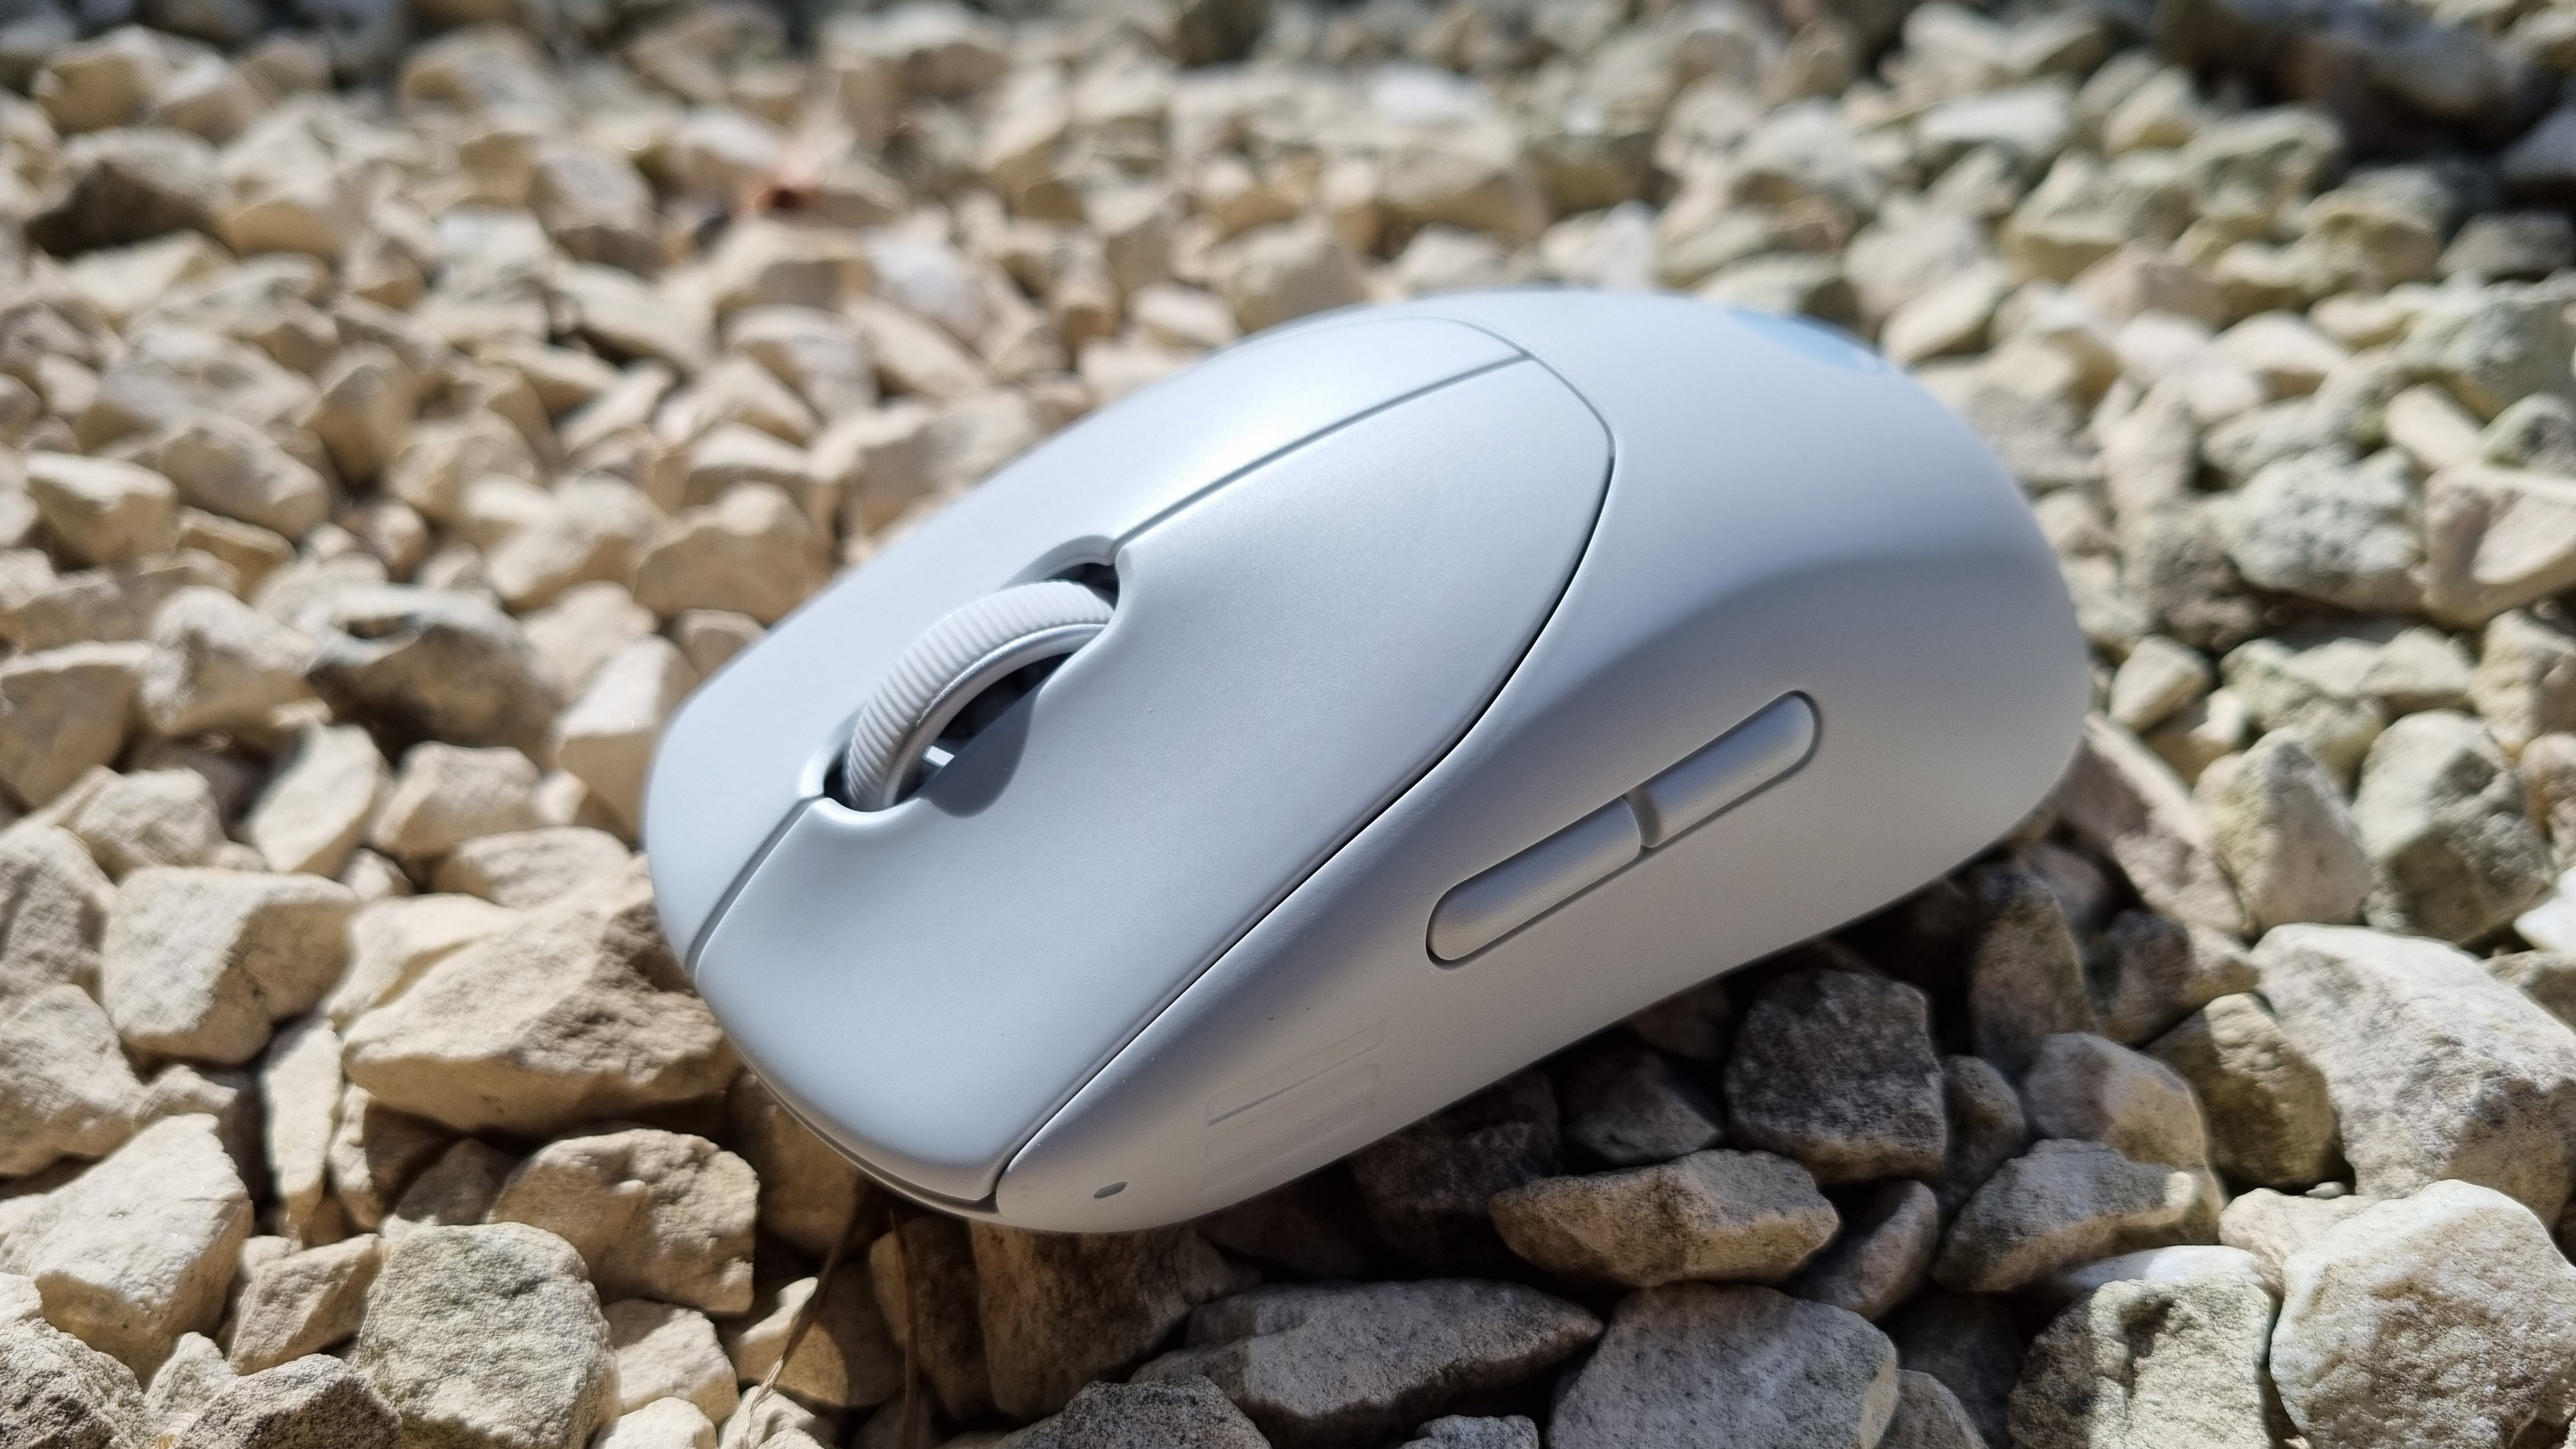 The Alienware Pro Wireless Gaming Mouse on white gravel